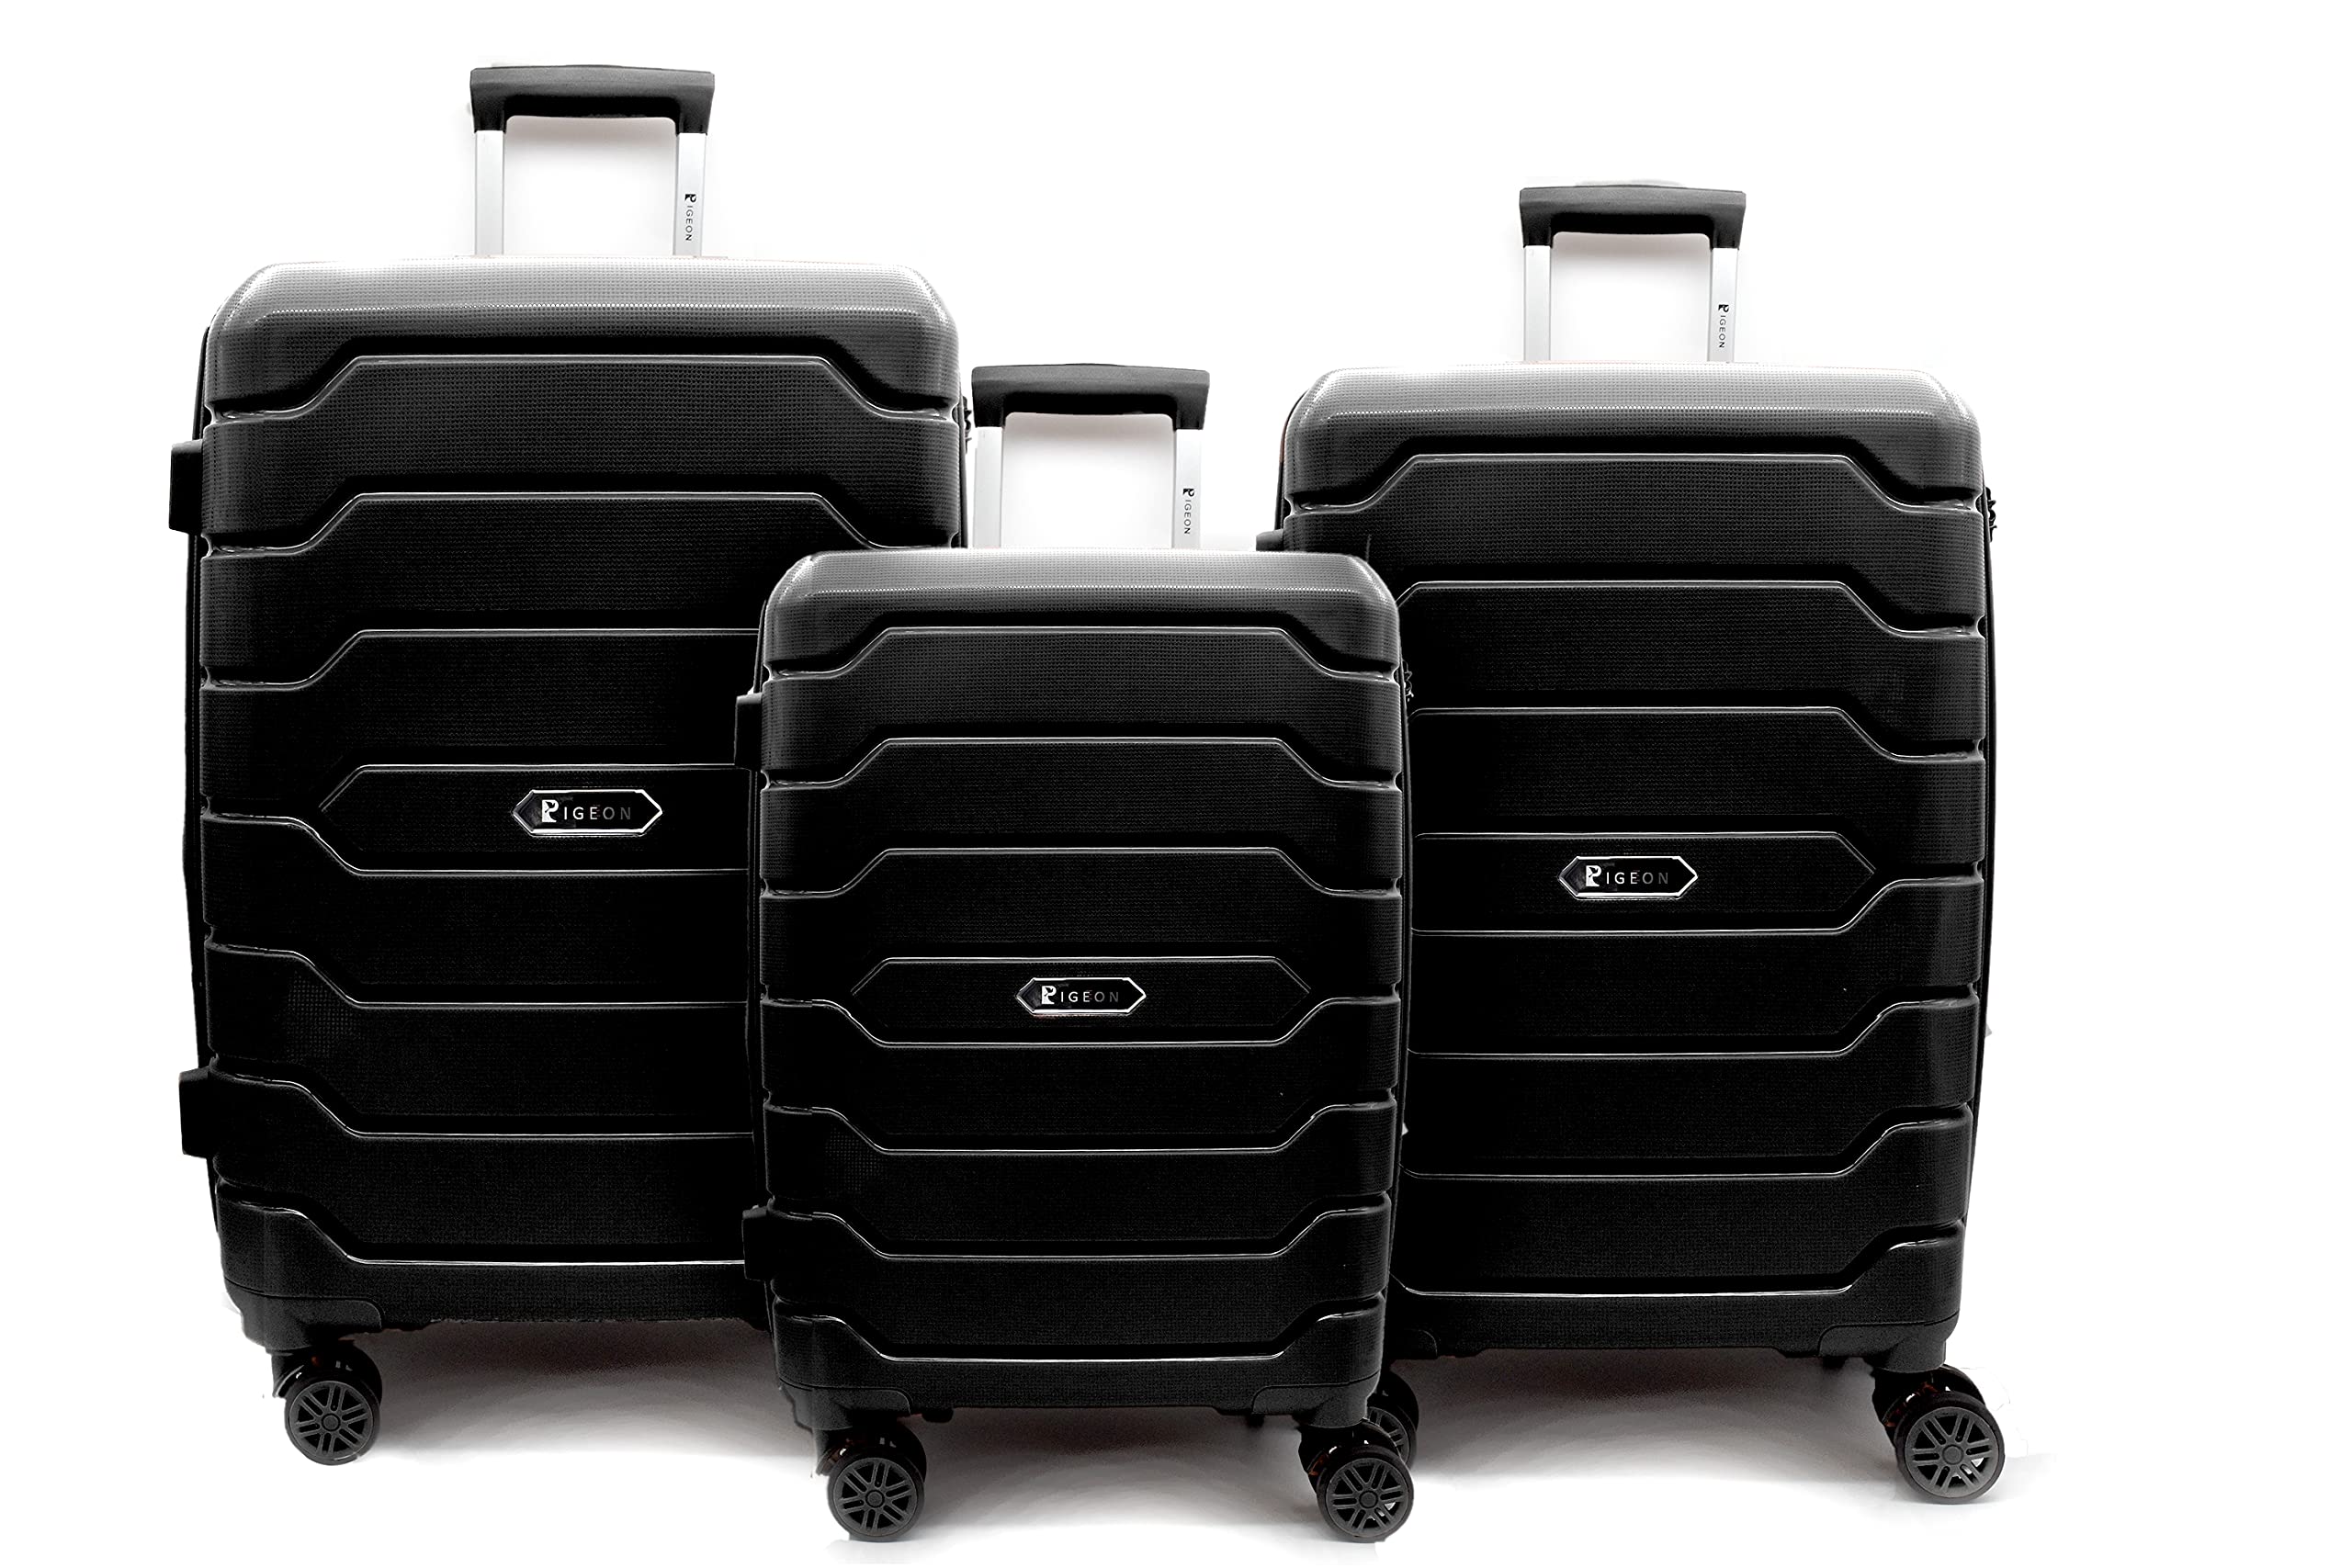 PIGEON Luggage Set of 3 Unbreakable - Expandable Lightweight PP Luggage Sets, water resistant with 3 digit number Lock